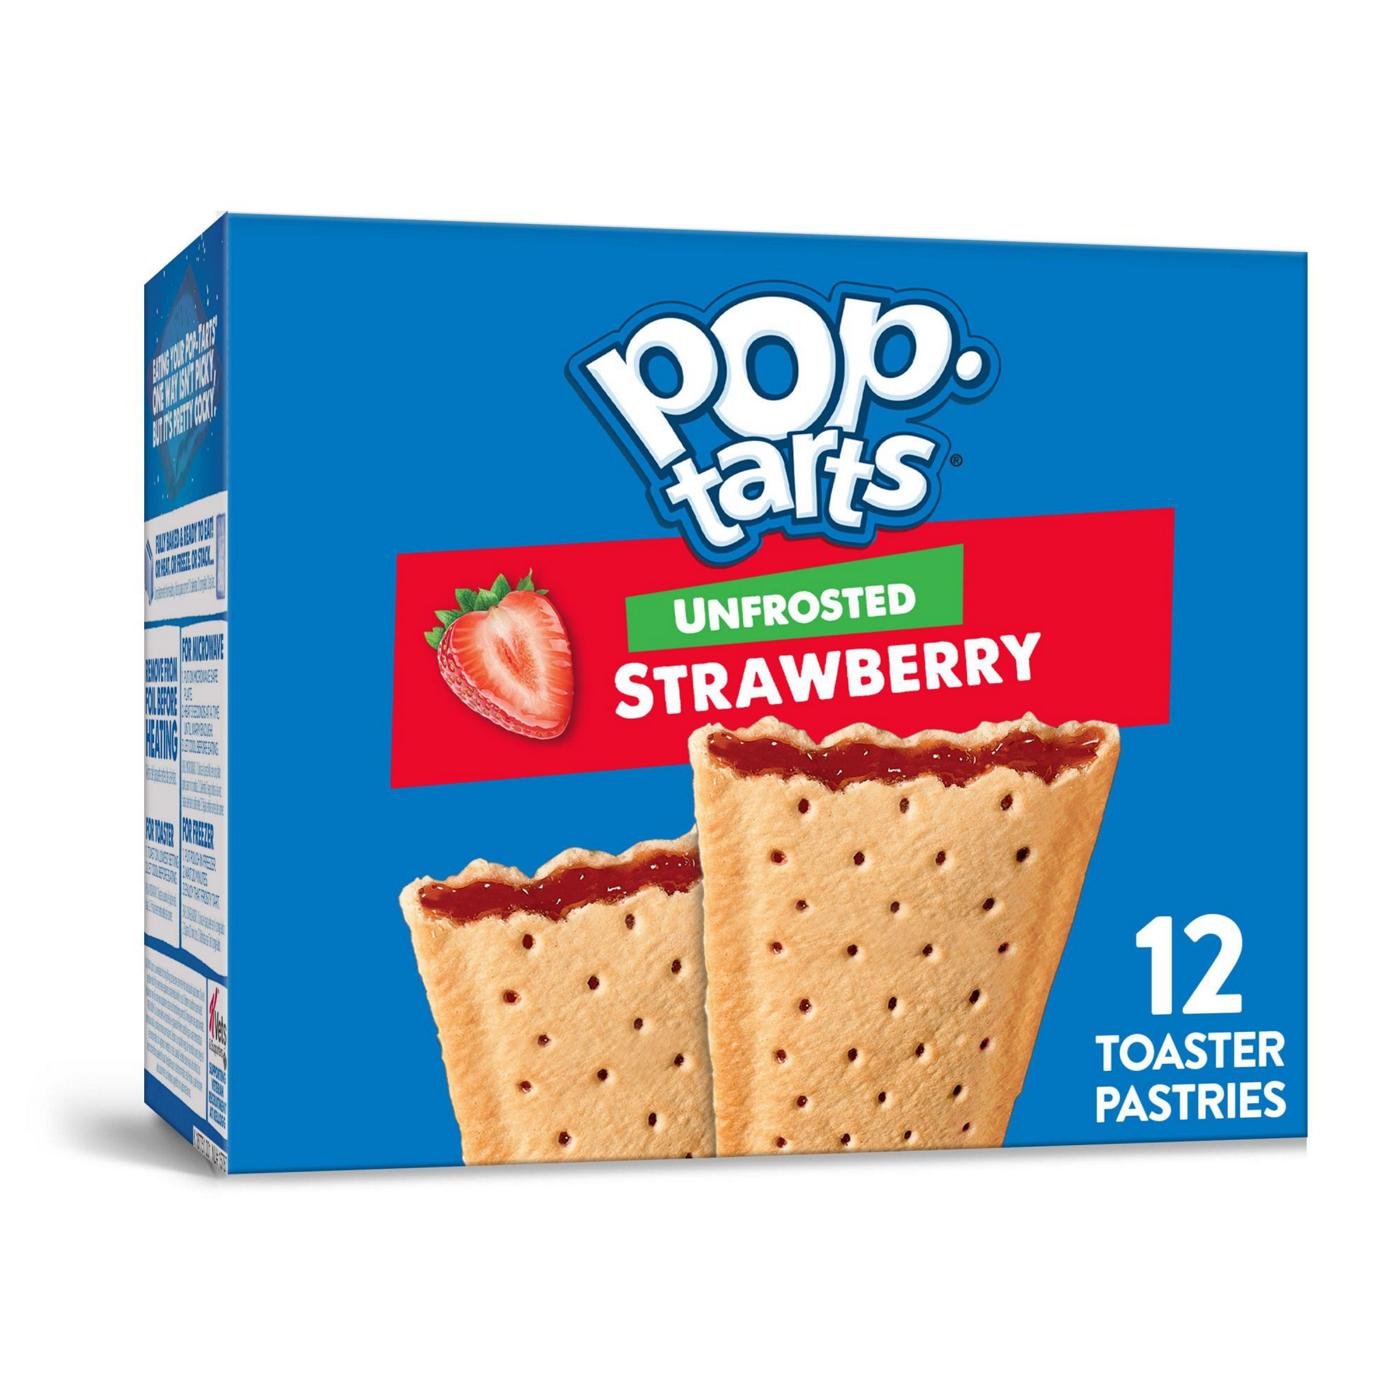 Pop-Tarts Unfrosted Strawberry Toaster Pastries; image 1 of 11